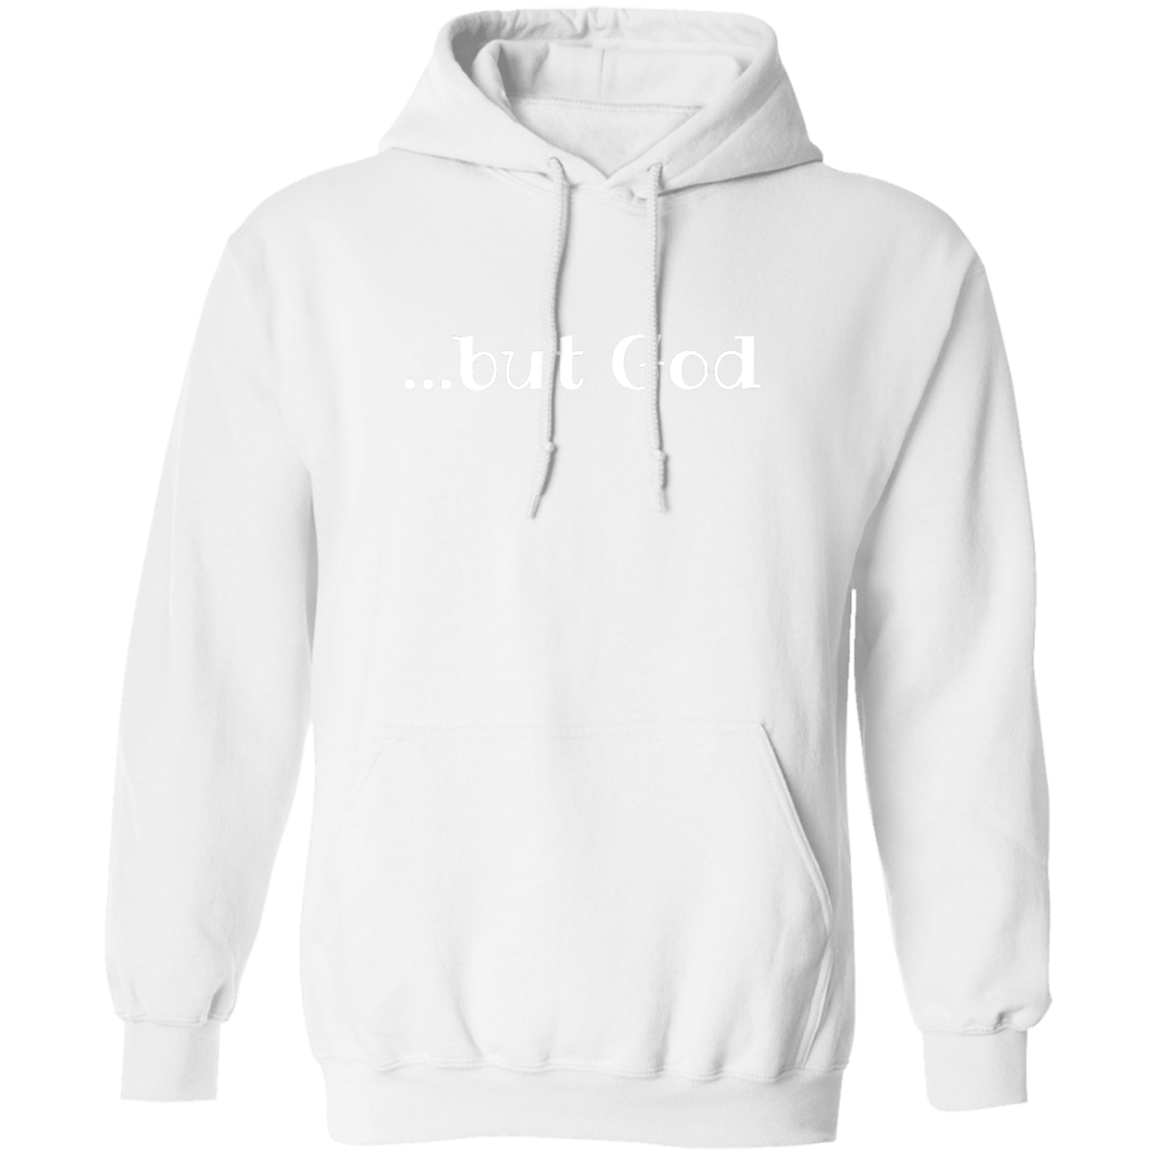 But God Pullover Hoodie